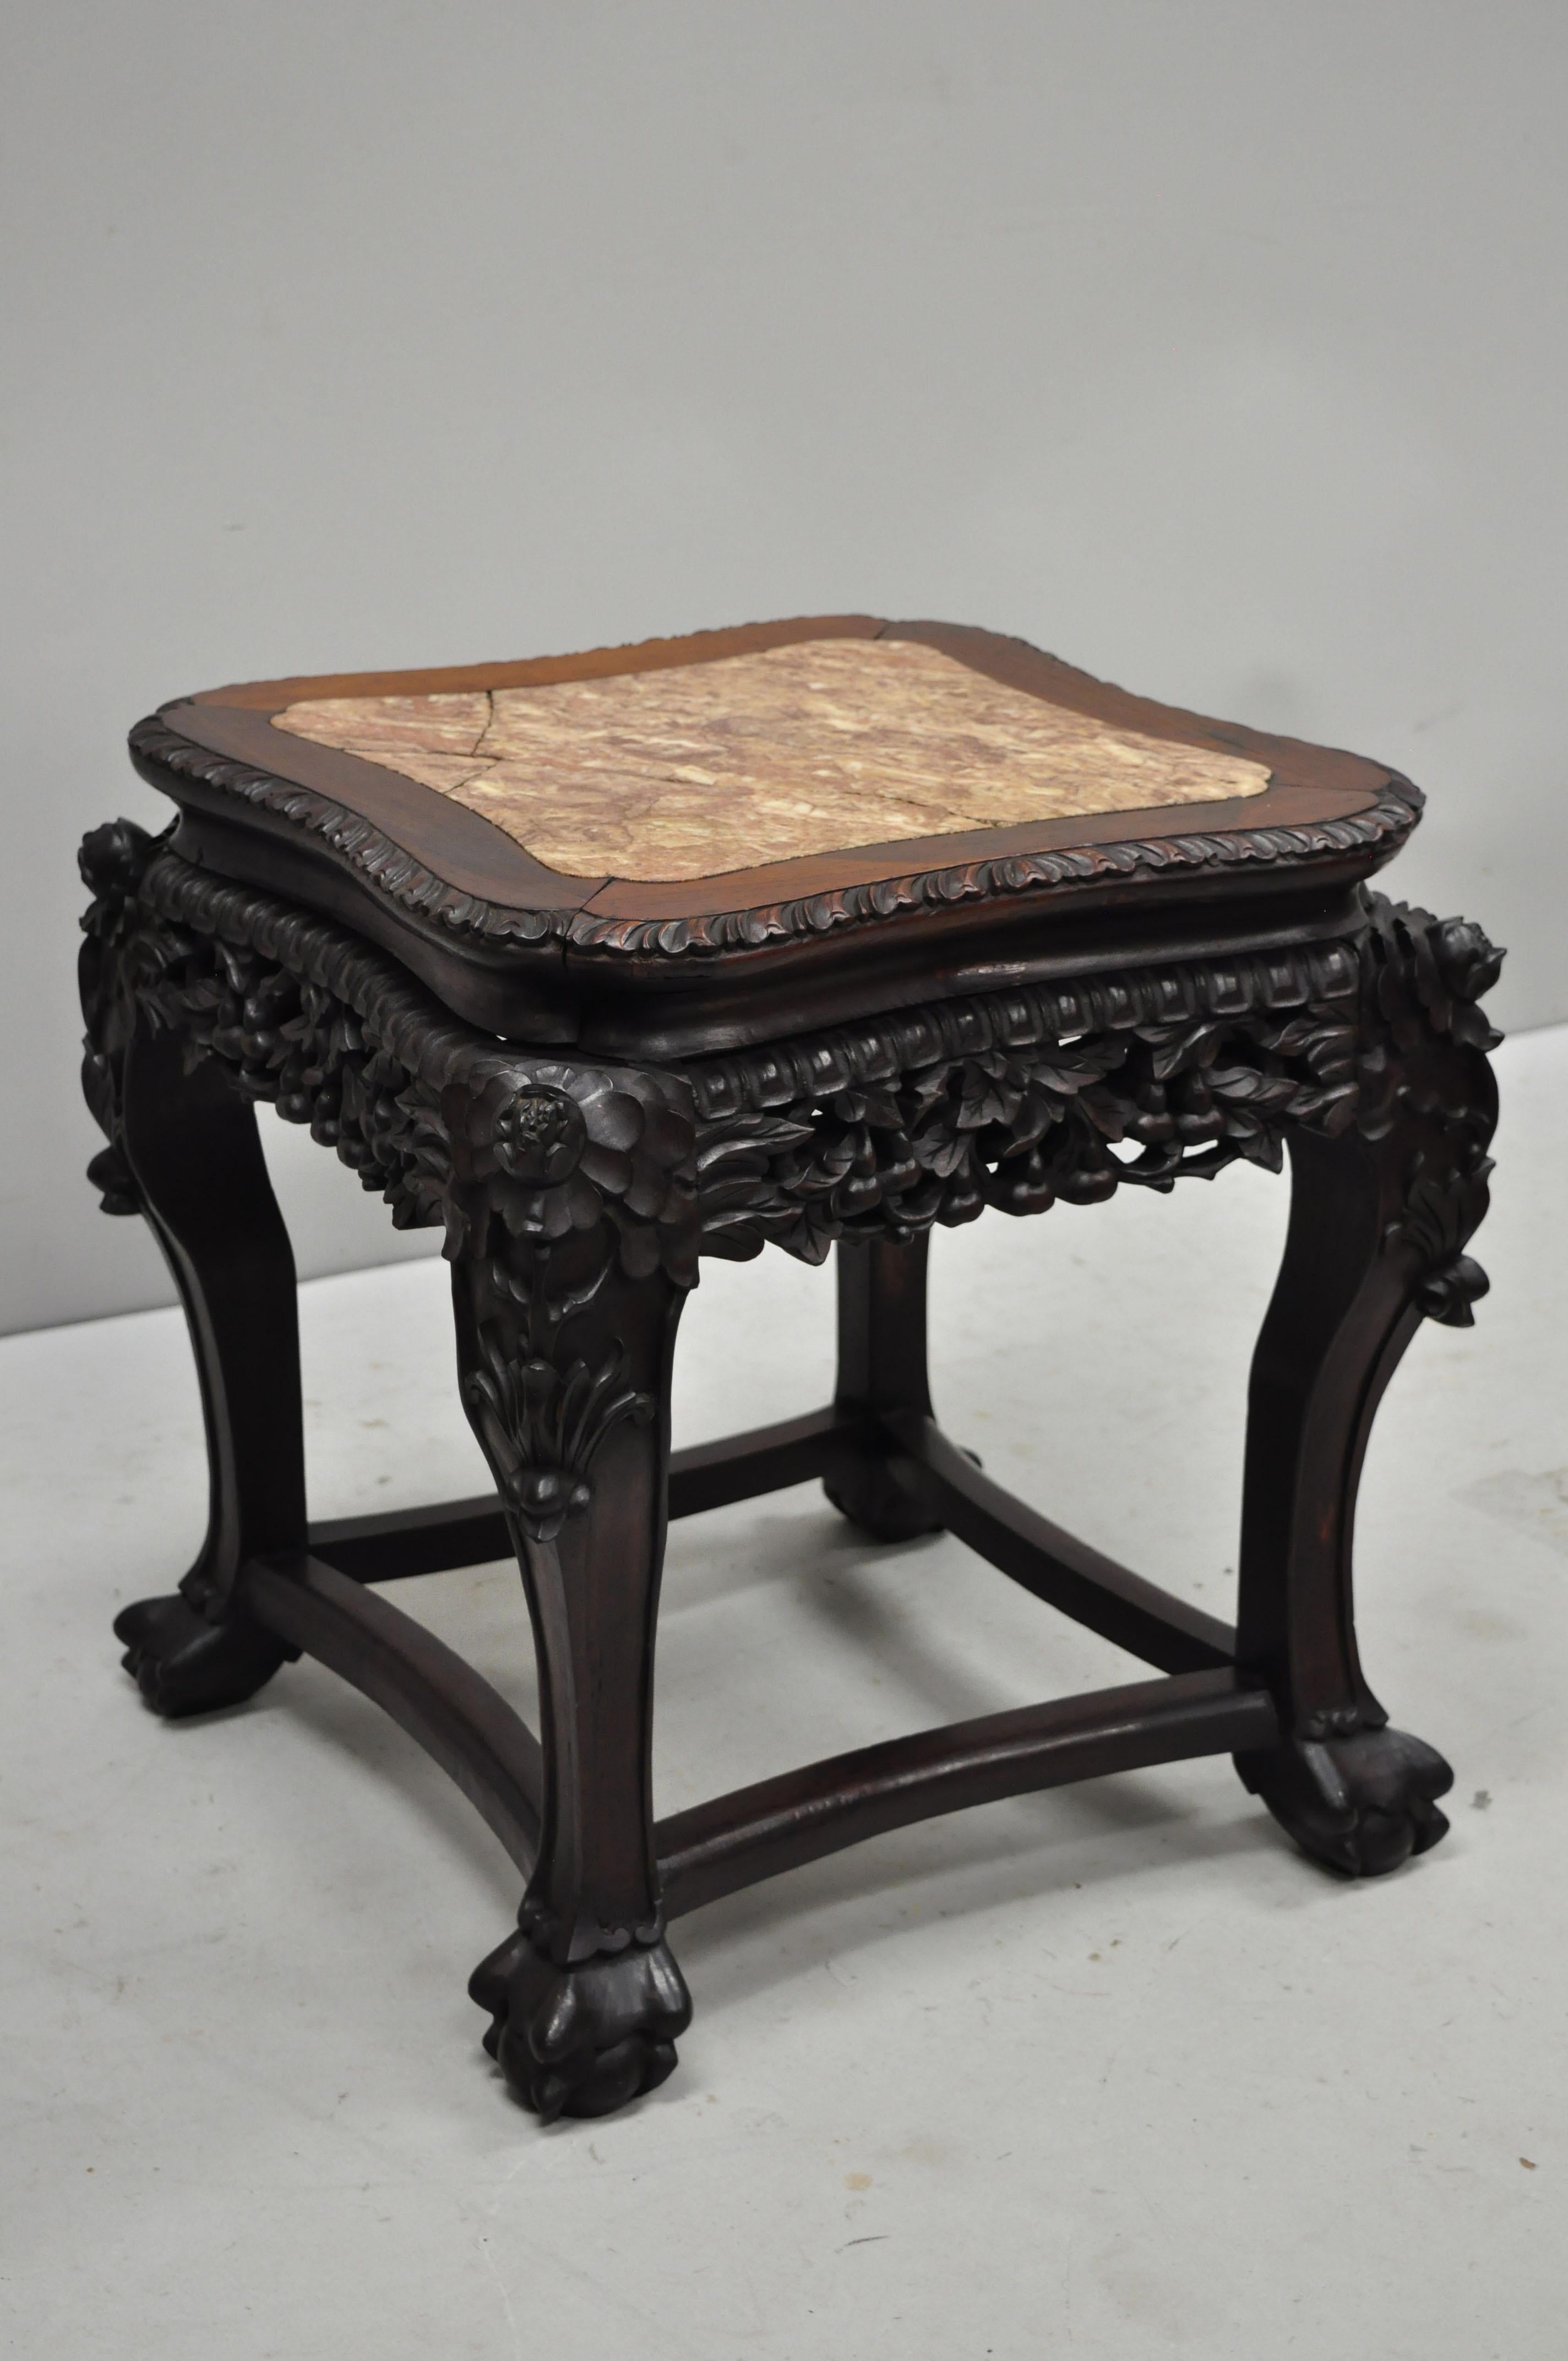 Antique carved hardwood rosewood and marble-top Chinese pedestal table (H). Item features inset marble top, pierce carved floral skirt, carved stretcher base, solid wood construction, finely carved details, very nice antique item, circa late